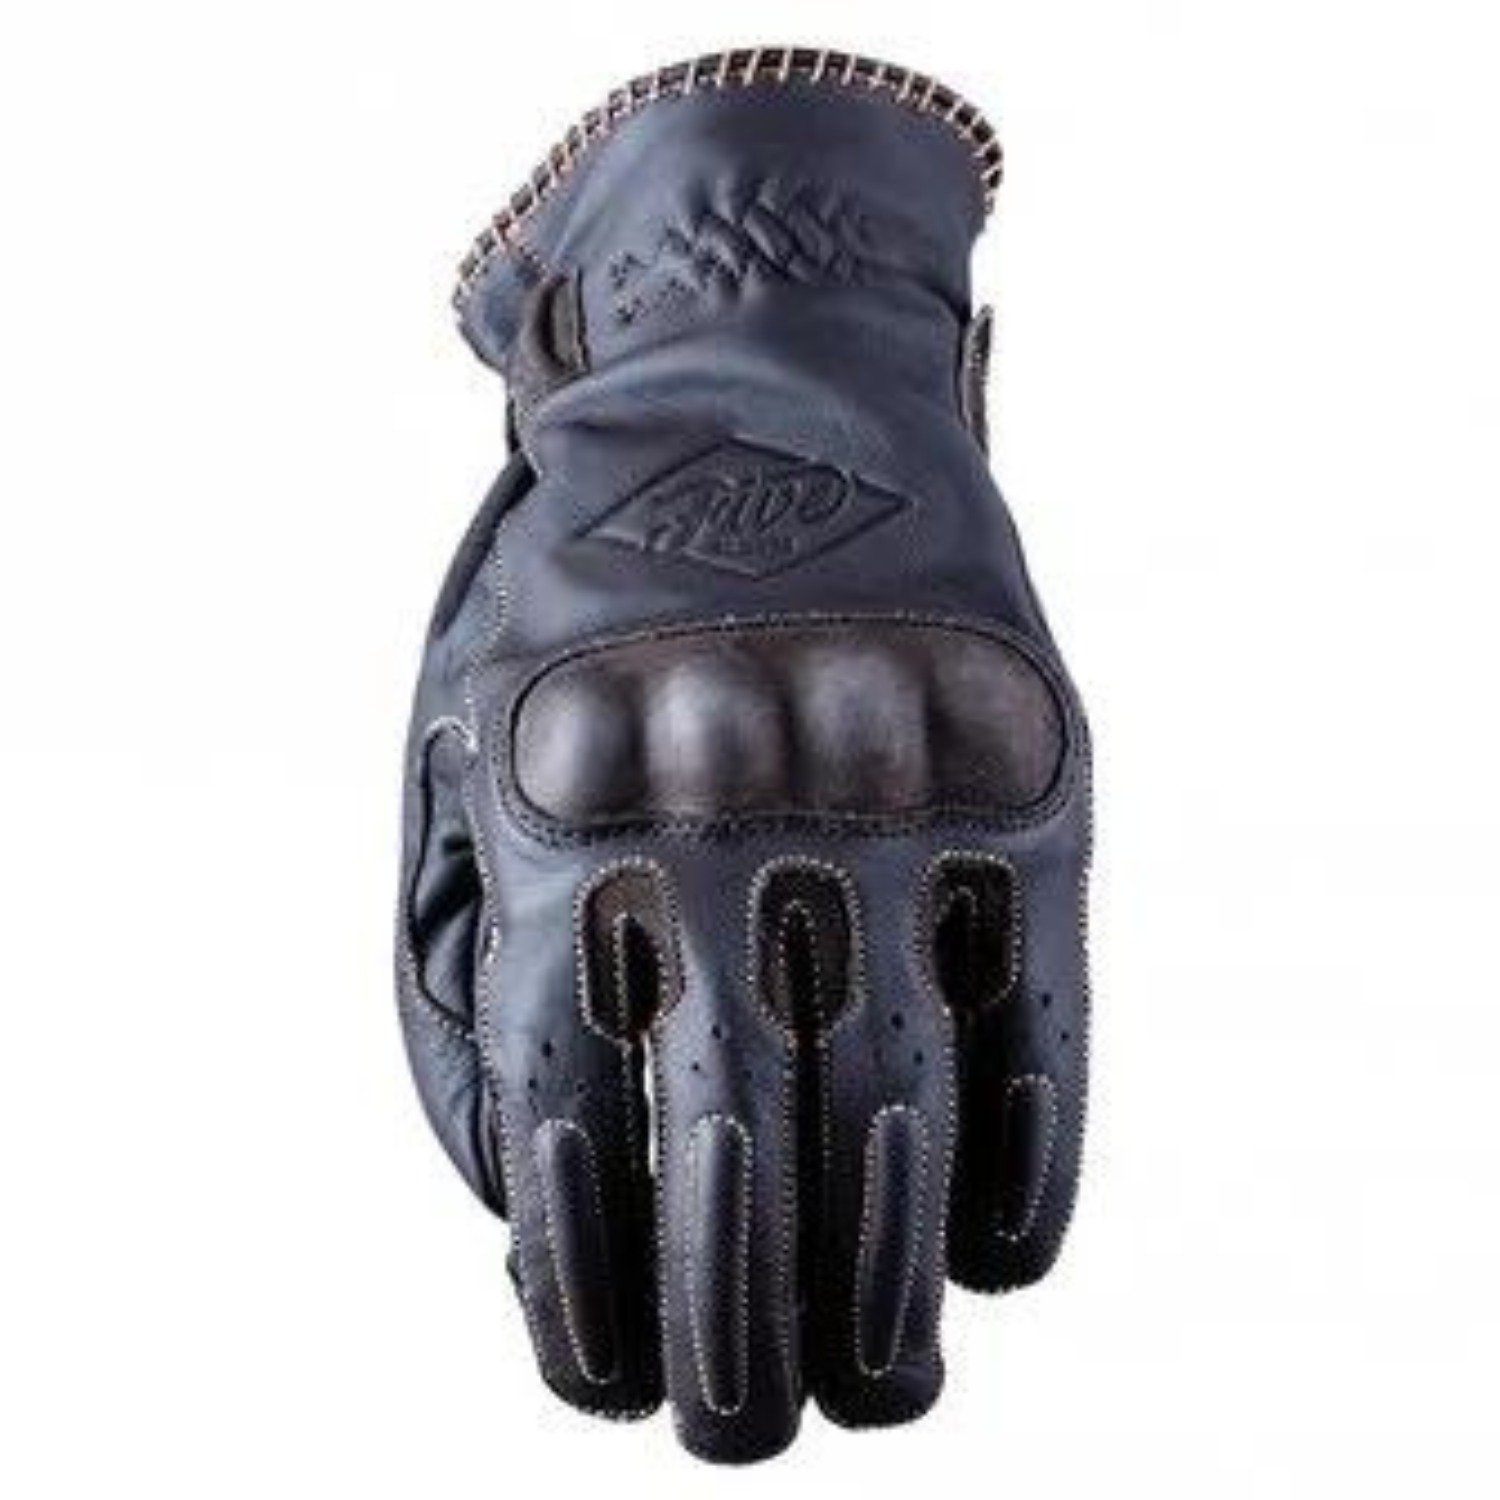 Image of Five Oklahoma Gloves Dark Brown Size 3XL ID 4770916487702